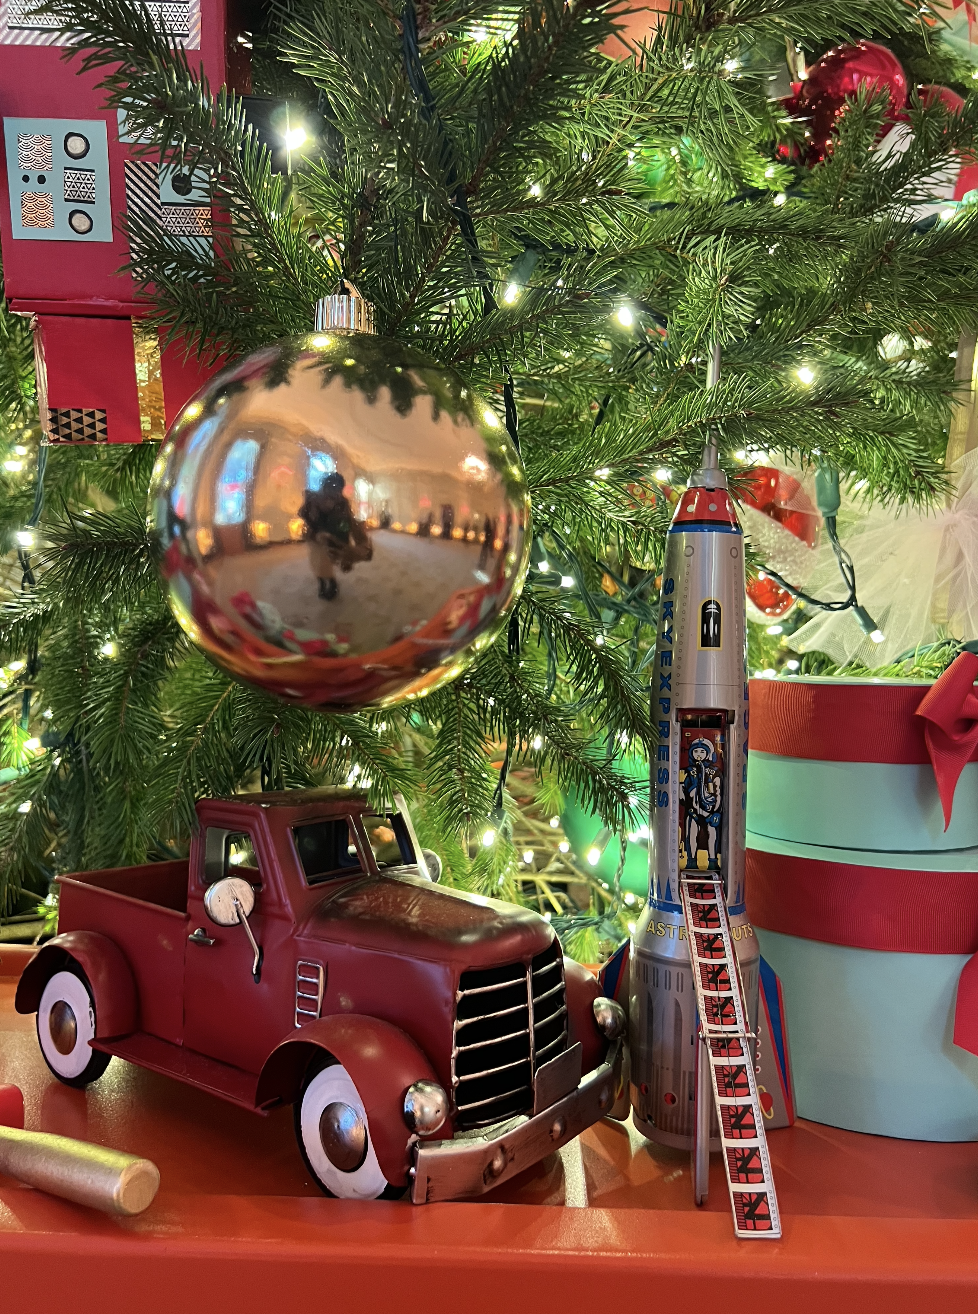 A close up of Christmas tree decorations including a spaceship and a truck.